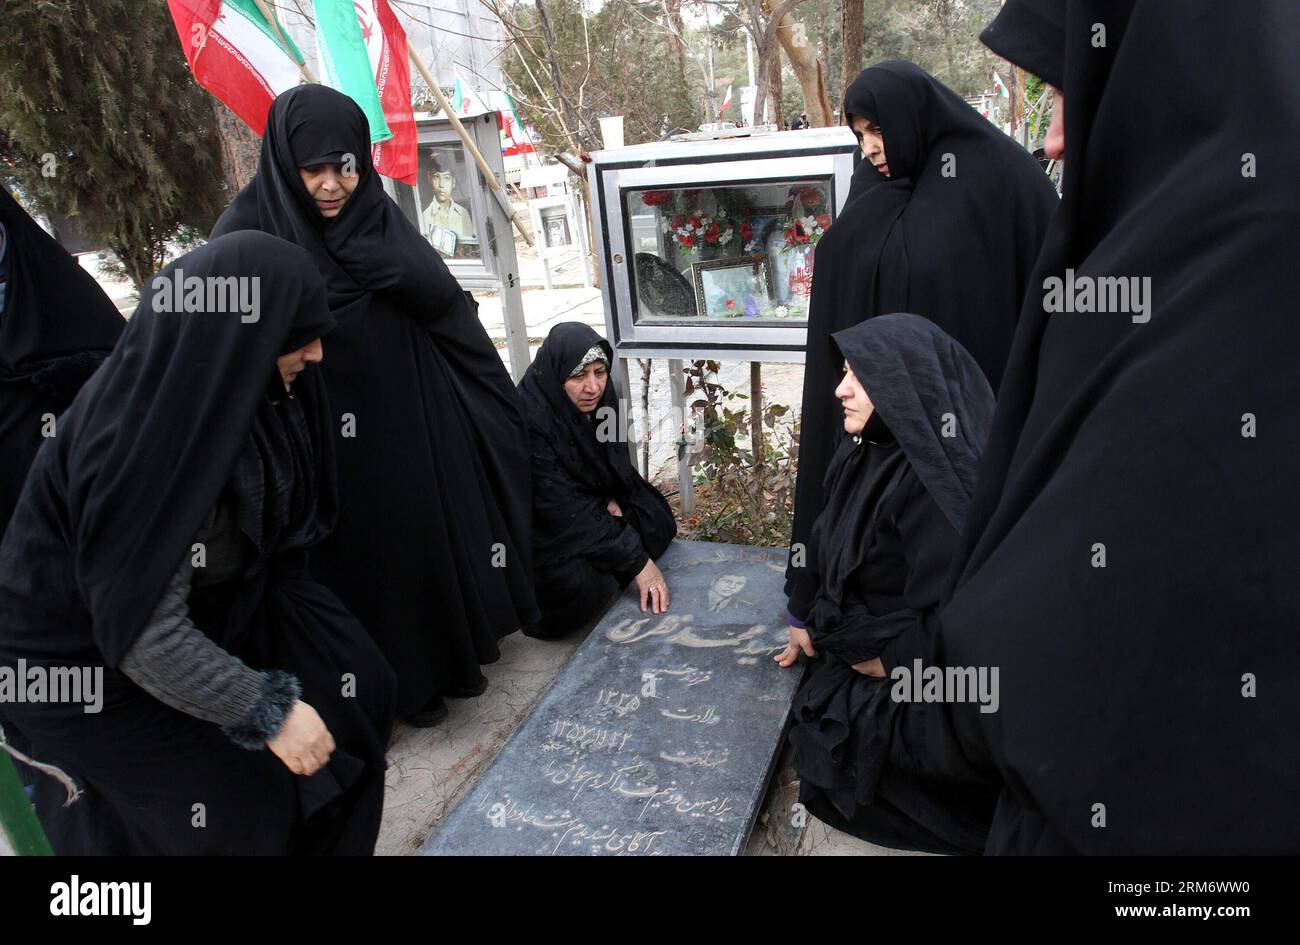 TEHRAN, (Xinhua) -- Iranian women visit the graves of people who were killed during the 1979 Islamic revolution at the Behesht-e Zahra cemetery outside Tehran, Iran, on Feb. 1, 2014, to mark the 35th anniversary of the Islamic revolution. (Xinhua/AhmadHalabisaz) IRAN-TEHRAN-ISLAMIC REVOLUTION-ANNIVERSARY-CEMETERY PUBLICATIONxNOTxINxCHN   TEHRAN XINHUA Iranian Women Visit The Graves of Celebrities Who Were KILLED during The 1979 Islamic Revolution AT The Behesht e Zahra Cemetery outside TEHRAN Iran ON Feb 1 2014 to Mark The 35th Anniversary of The Islamic Revolution XINHUA  Iran TEHRAN Islamic Stock Photo